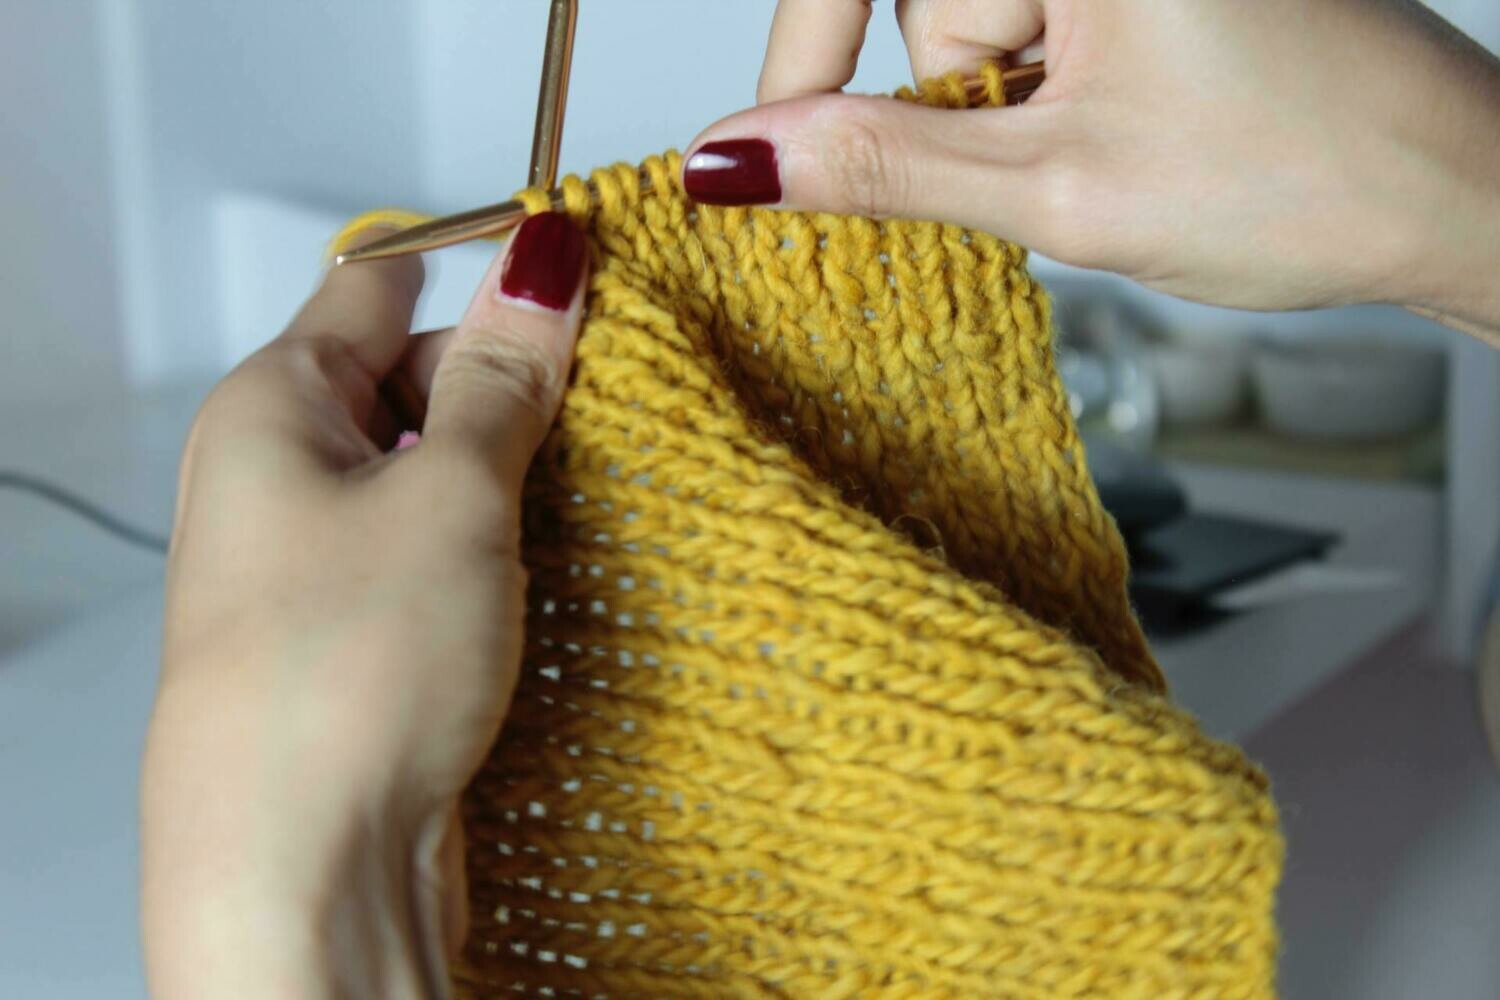 Learn To Knit! Beginners Knitting , Saturday 13th & 27th November 2.30-4.30